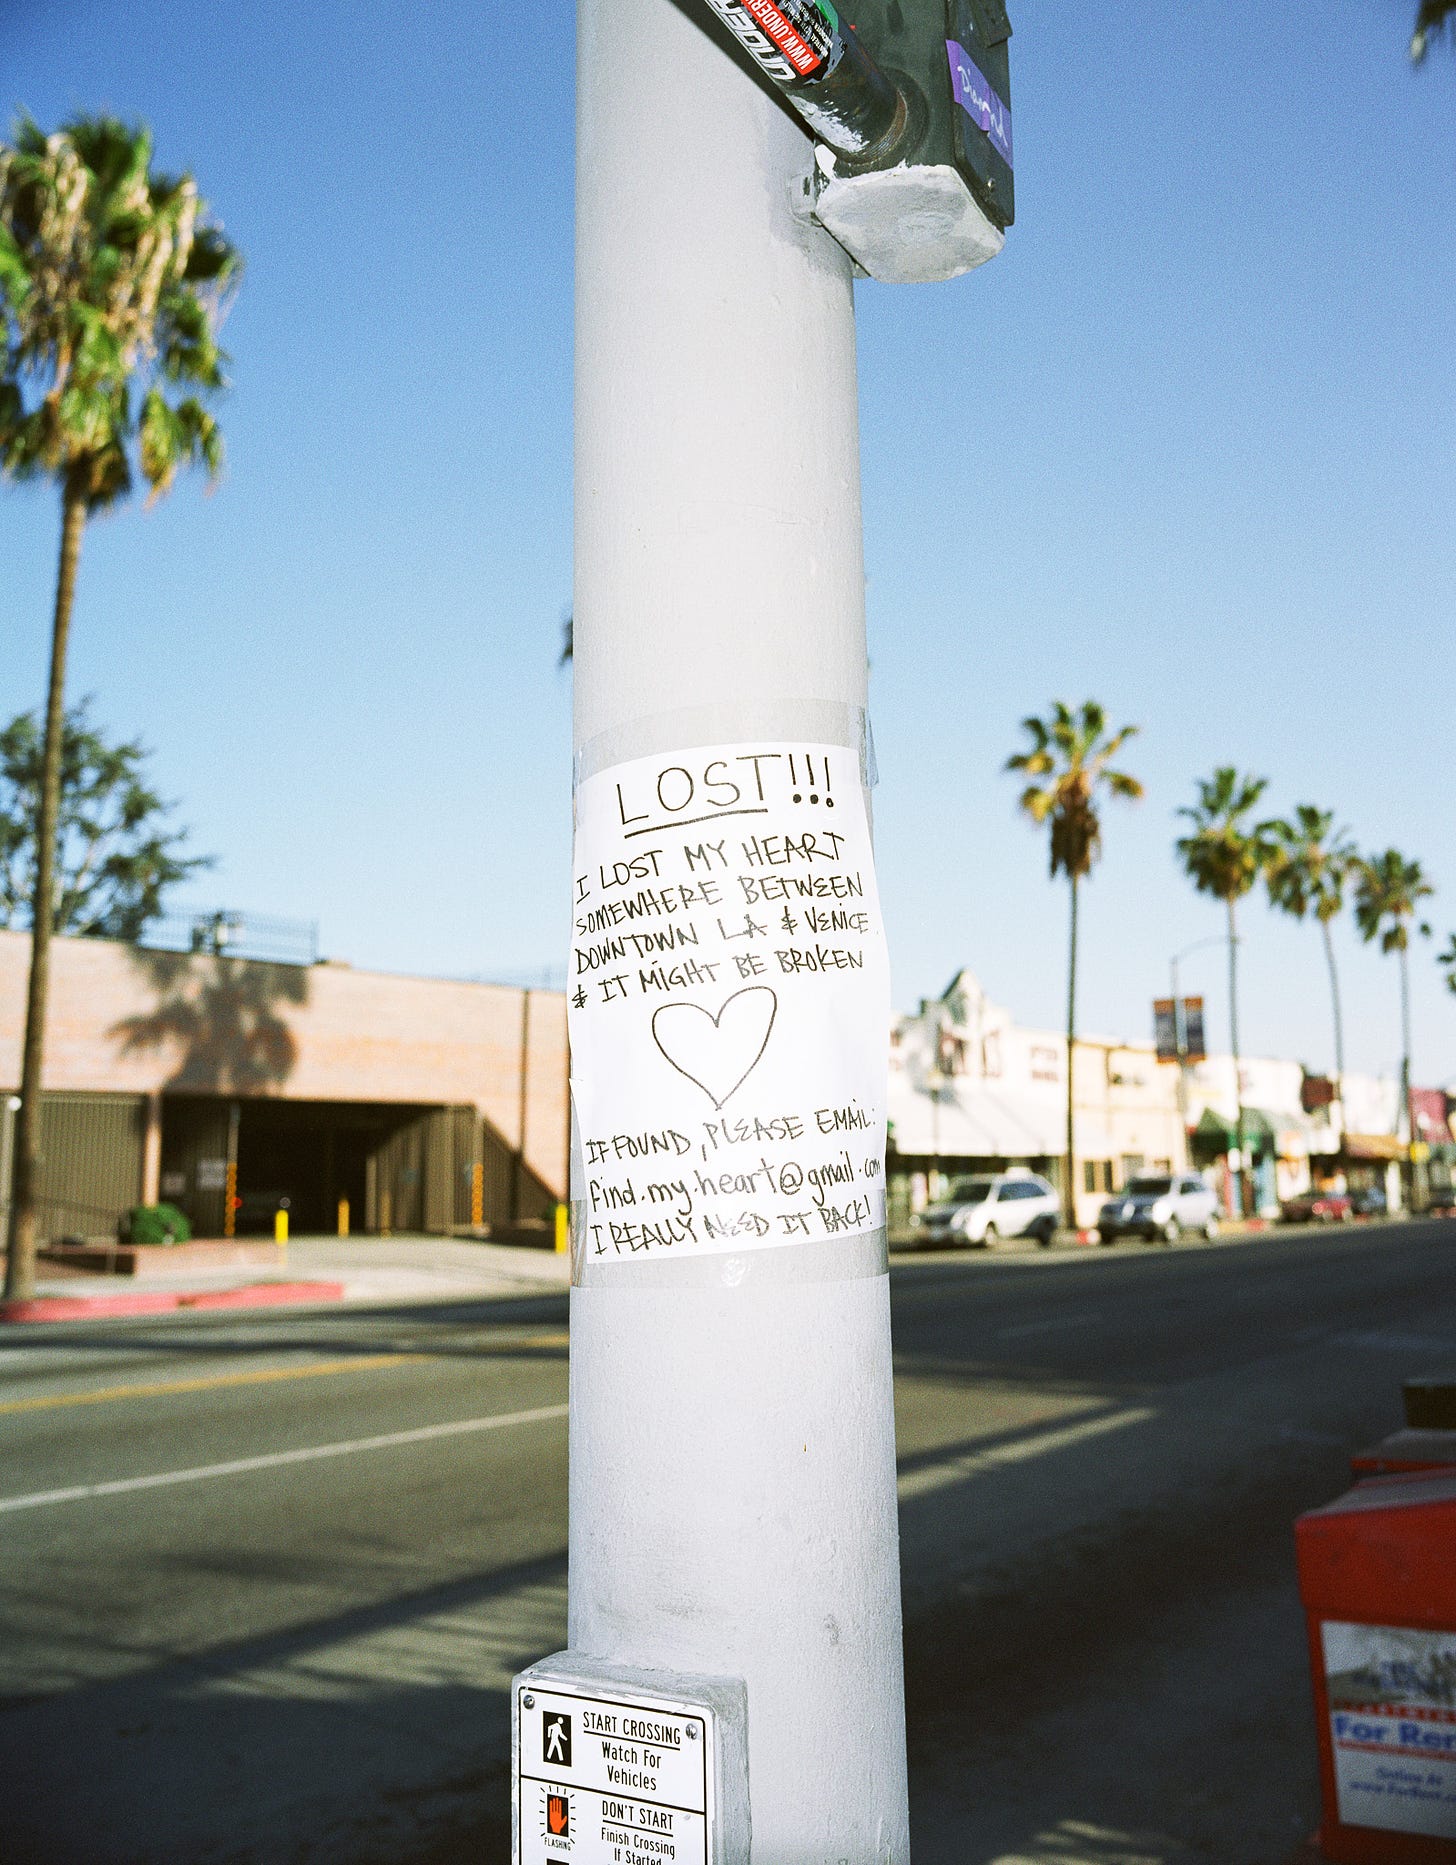 Sign tape to a pole, Fairfax District, Los Angeles